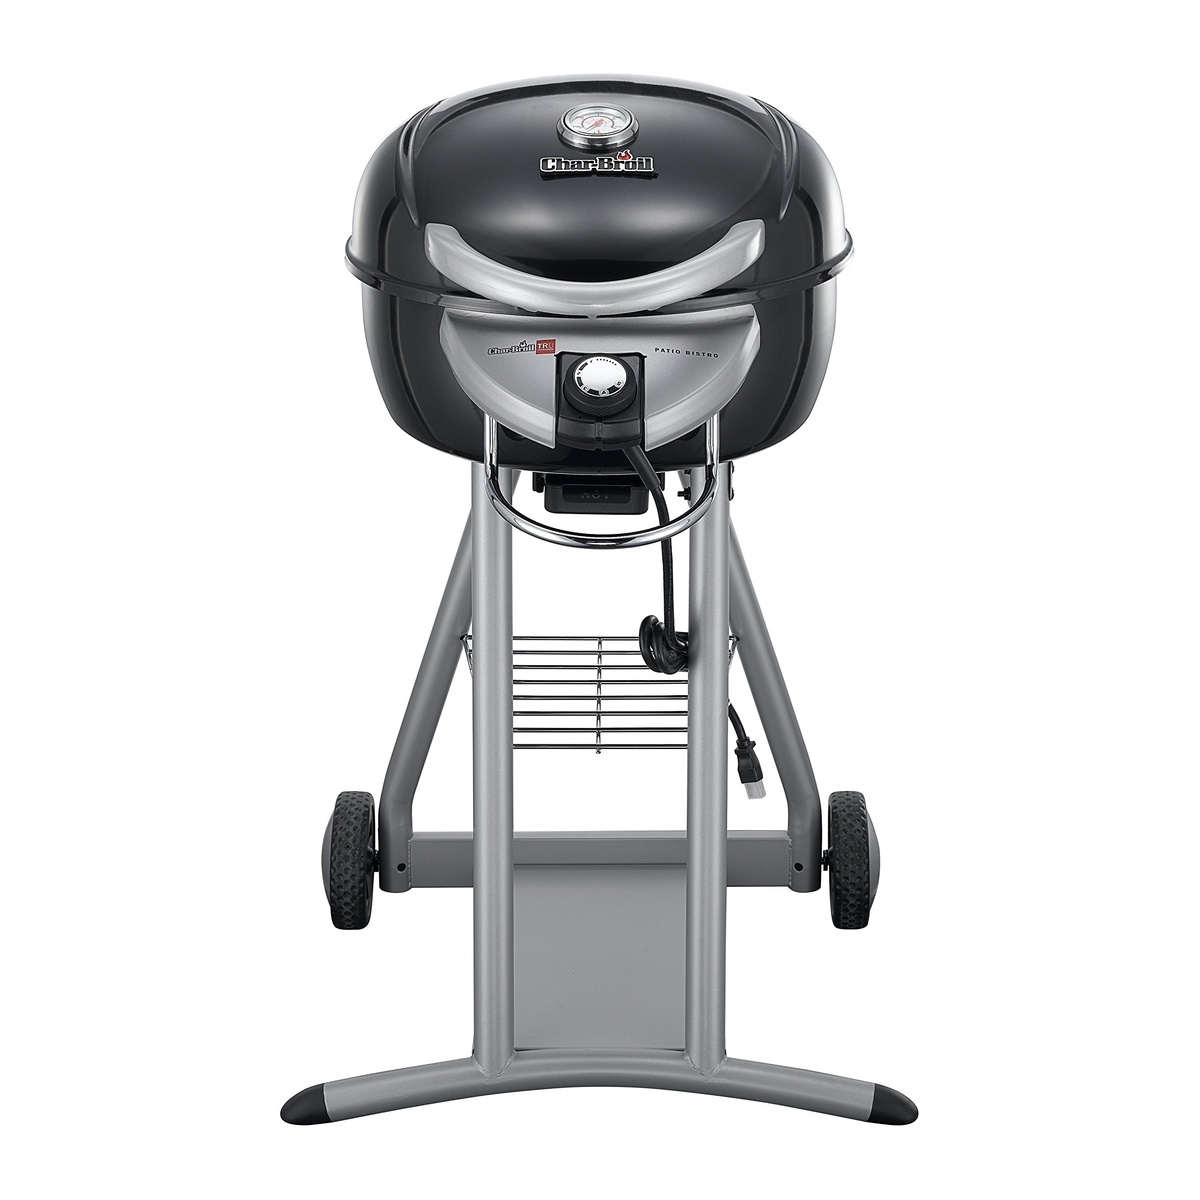 How To Clean Char Broil Patio Bistro Electric Grill